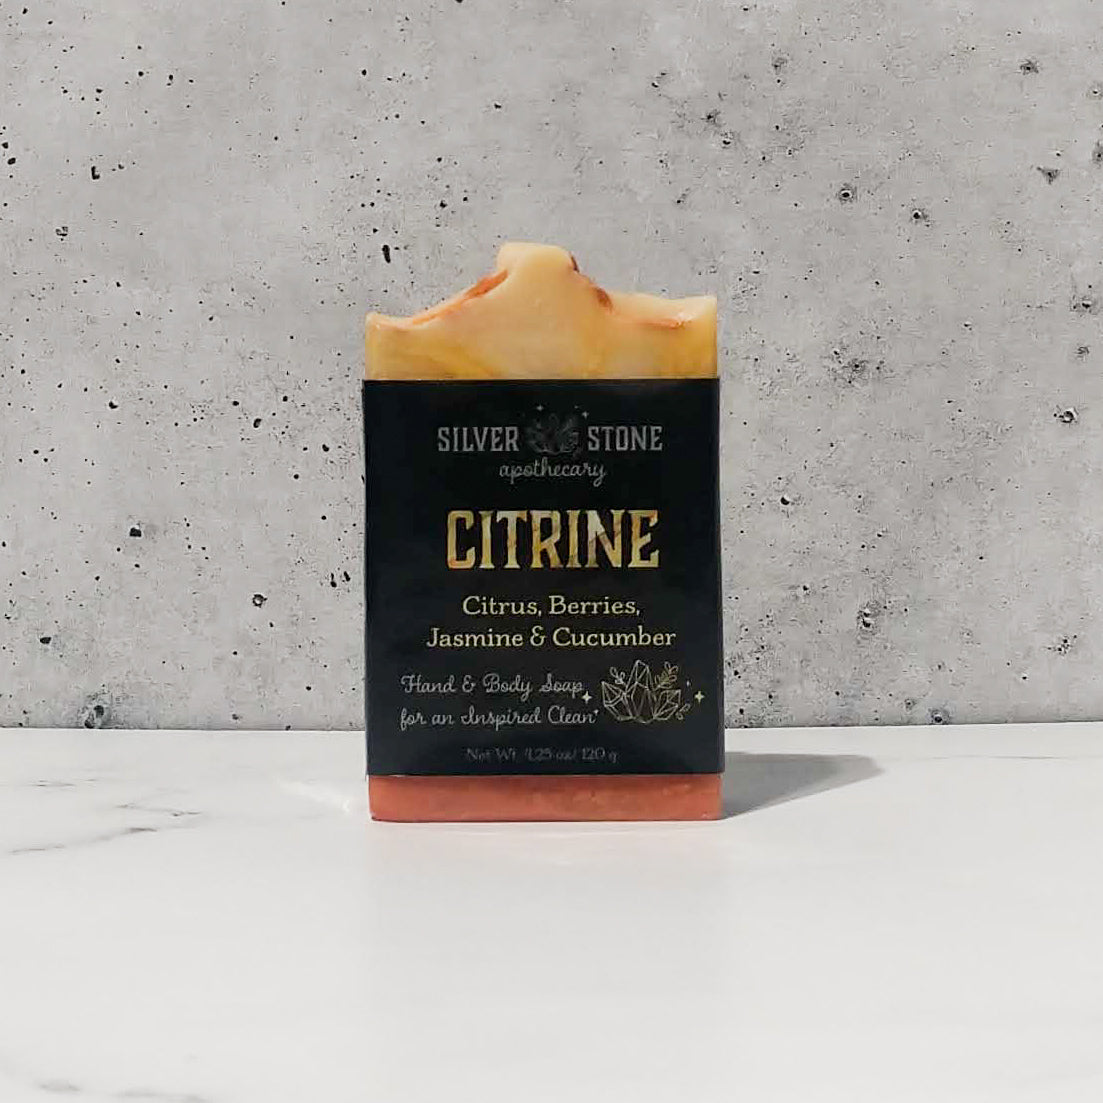 Citrine Hand and Body Soap